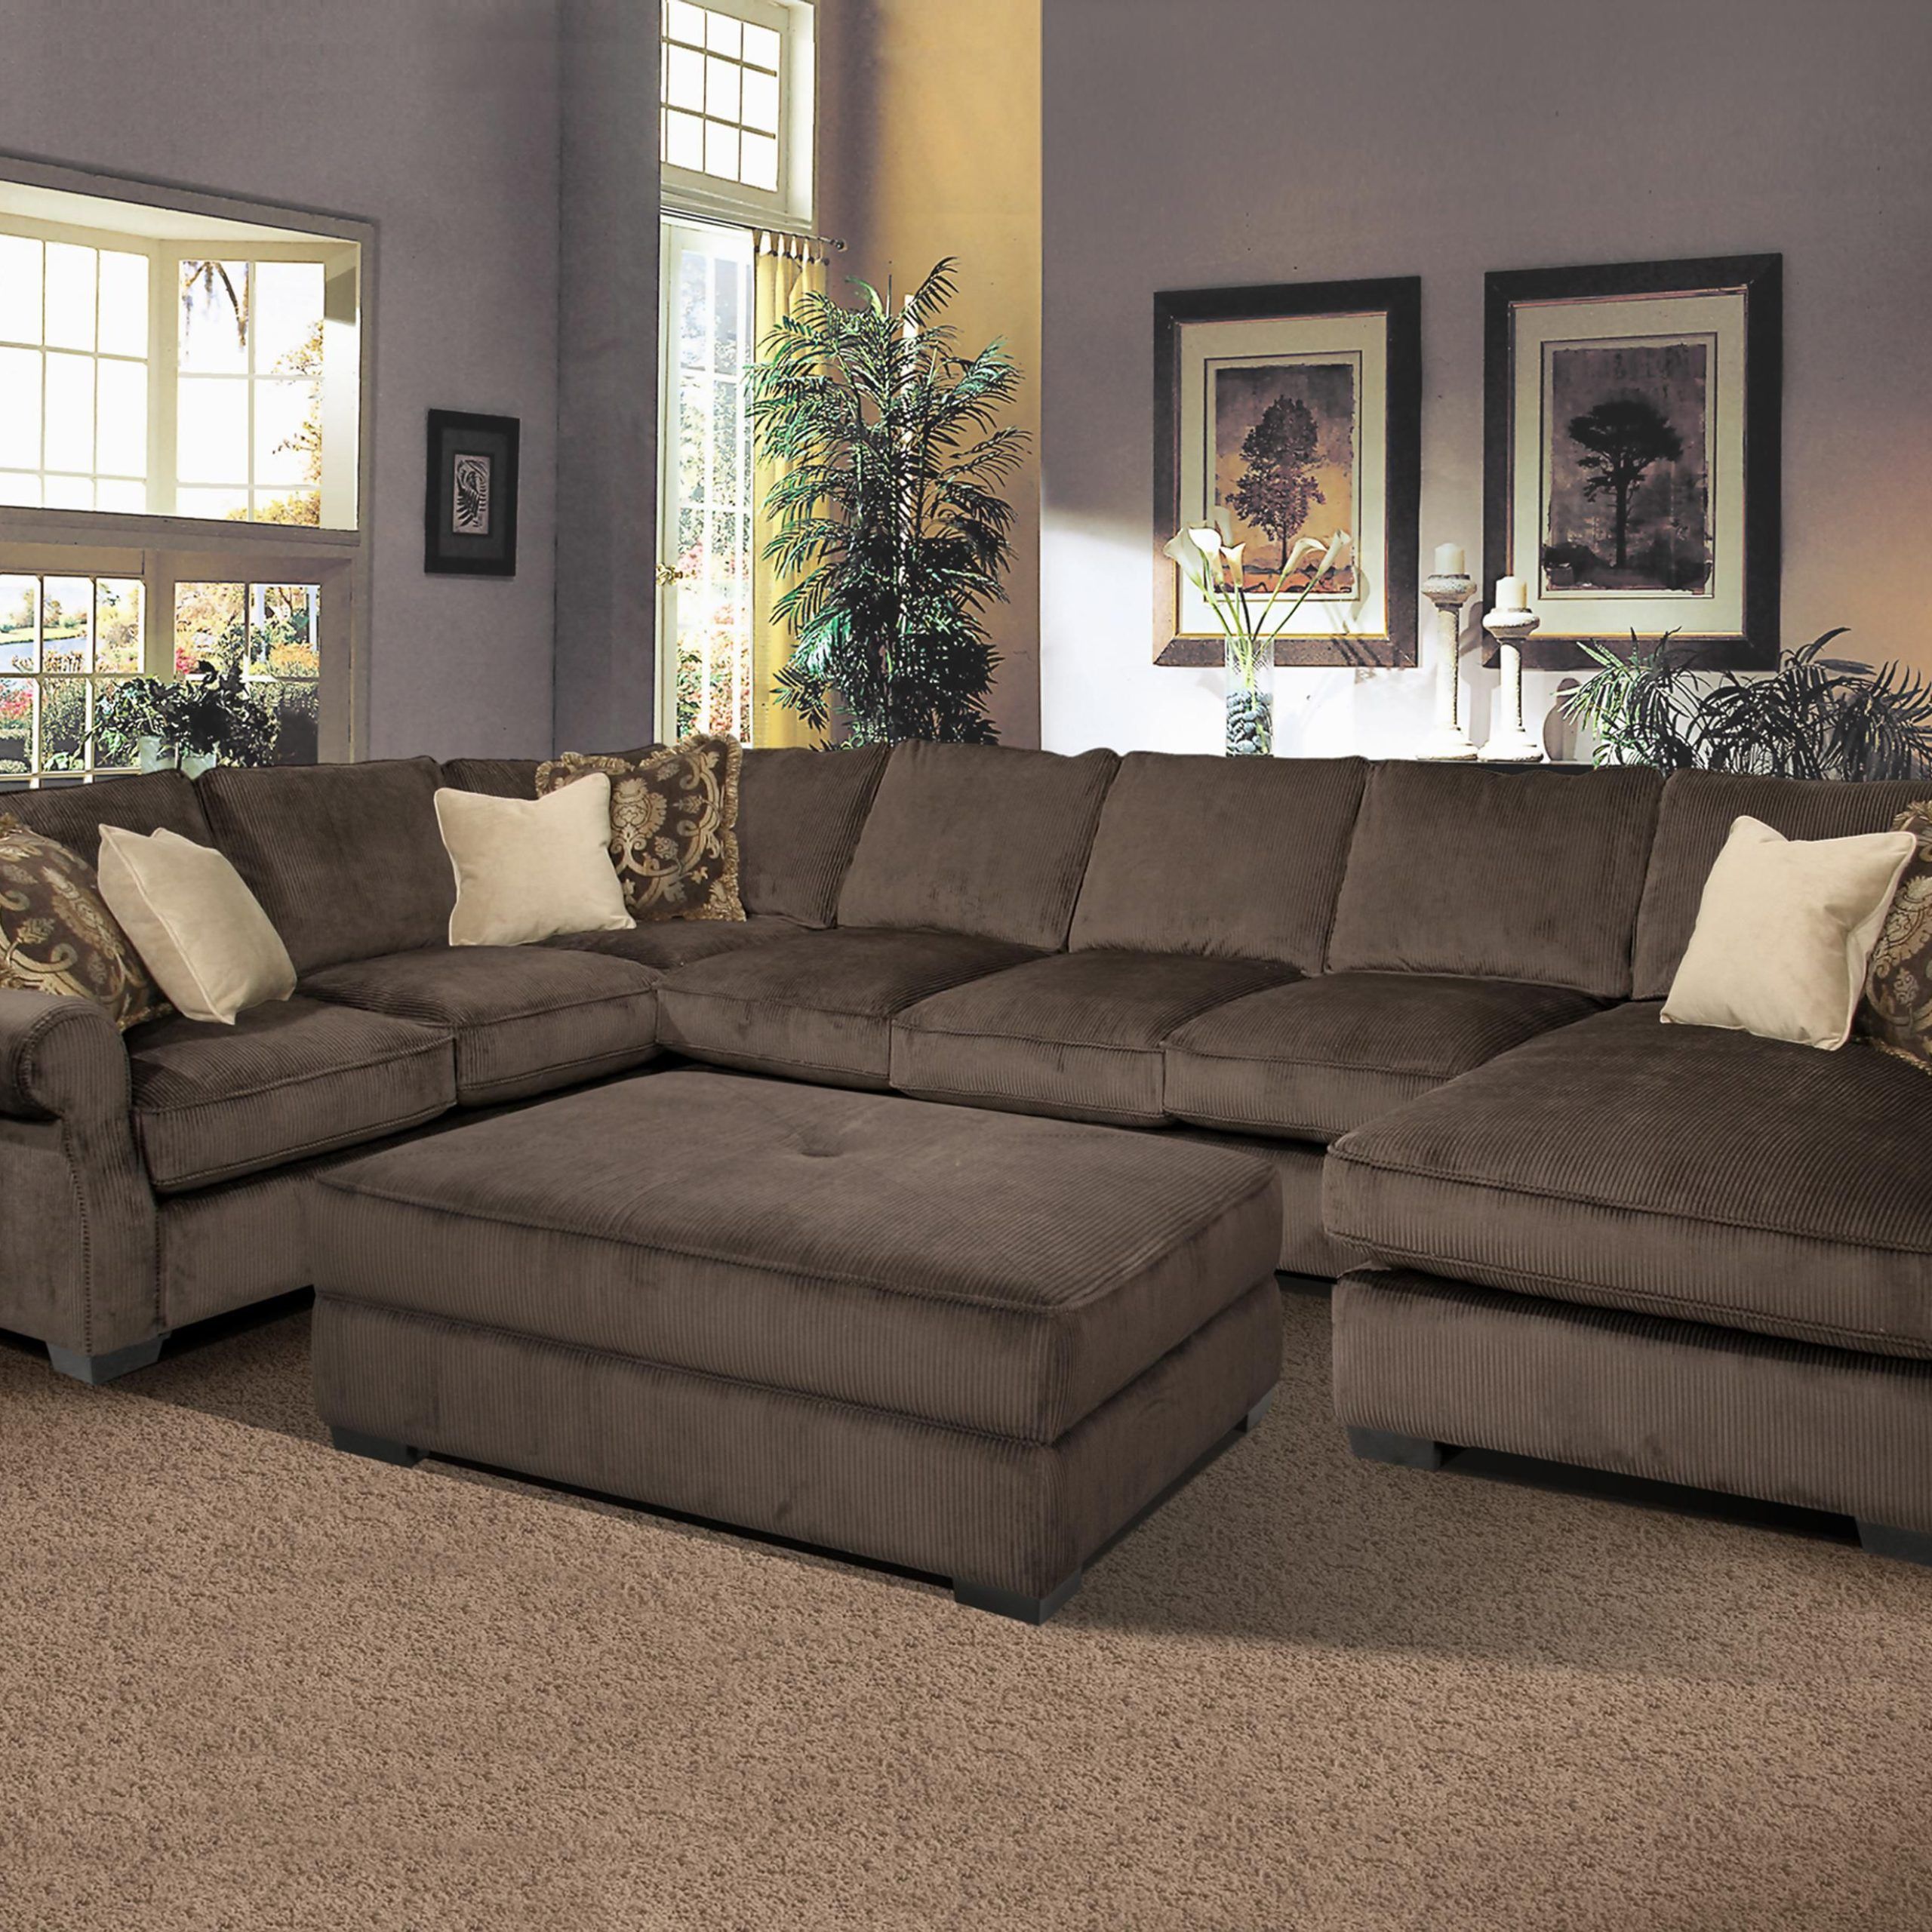 Furniture Elliot Fabric Microfiber 3 Piece Chaise Sectional Sofa Within Microfiber Sectional Corner Sofas (View 9 of 20)